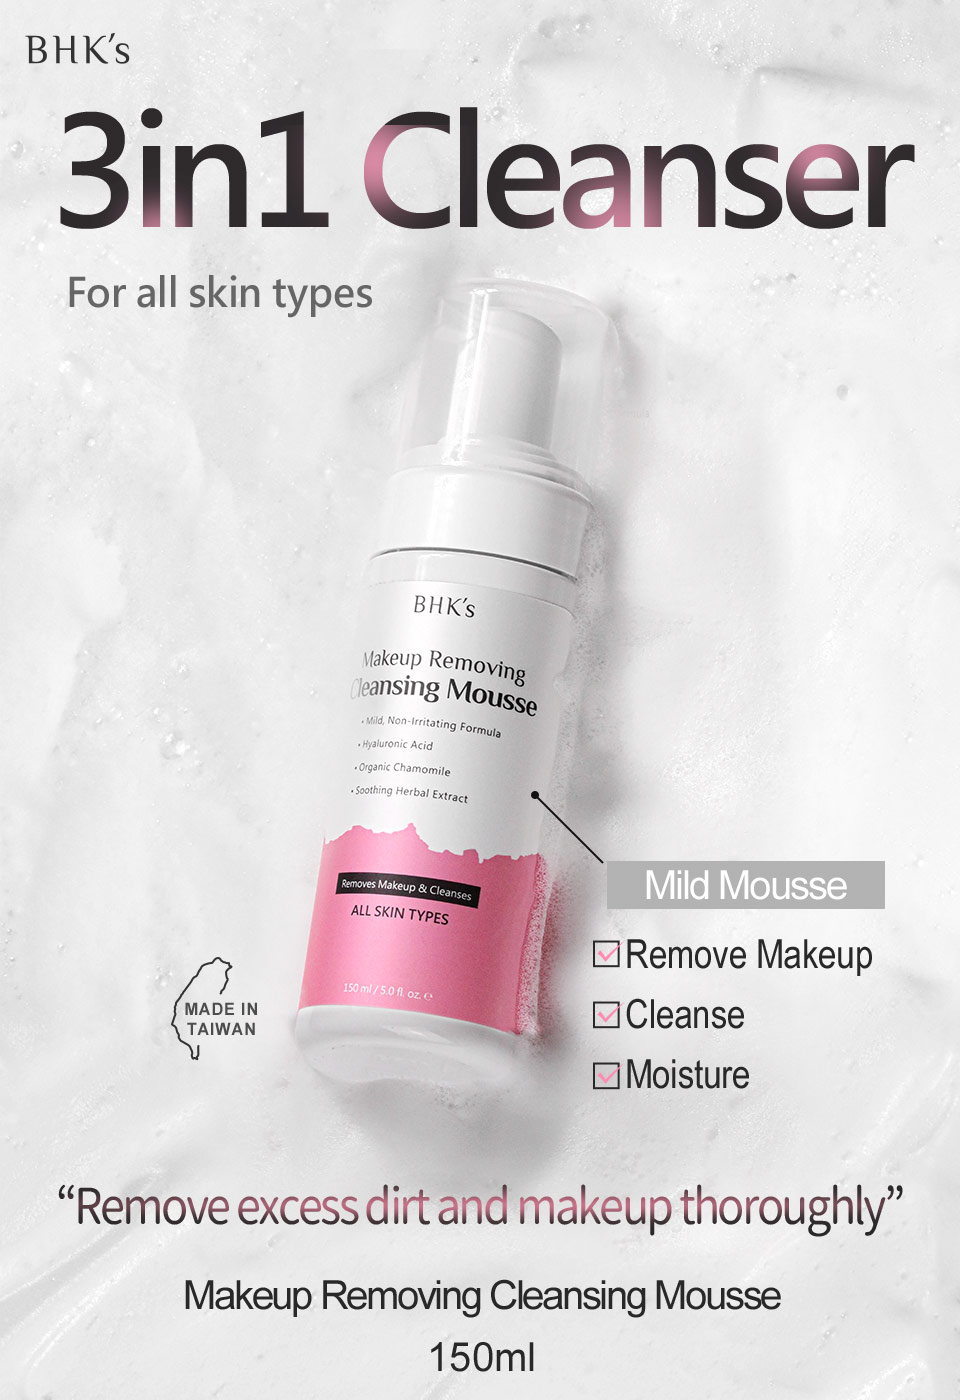 BHKs makeup removing cleansing mousse dissolve make-up quickly and clean dirt.